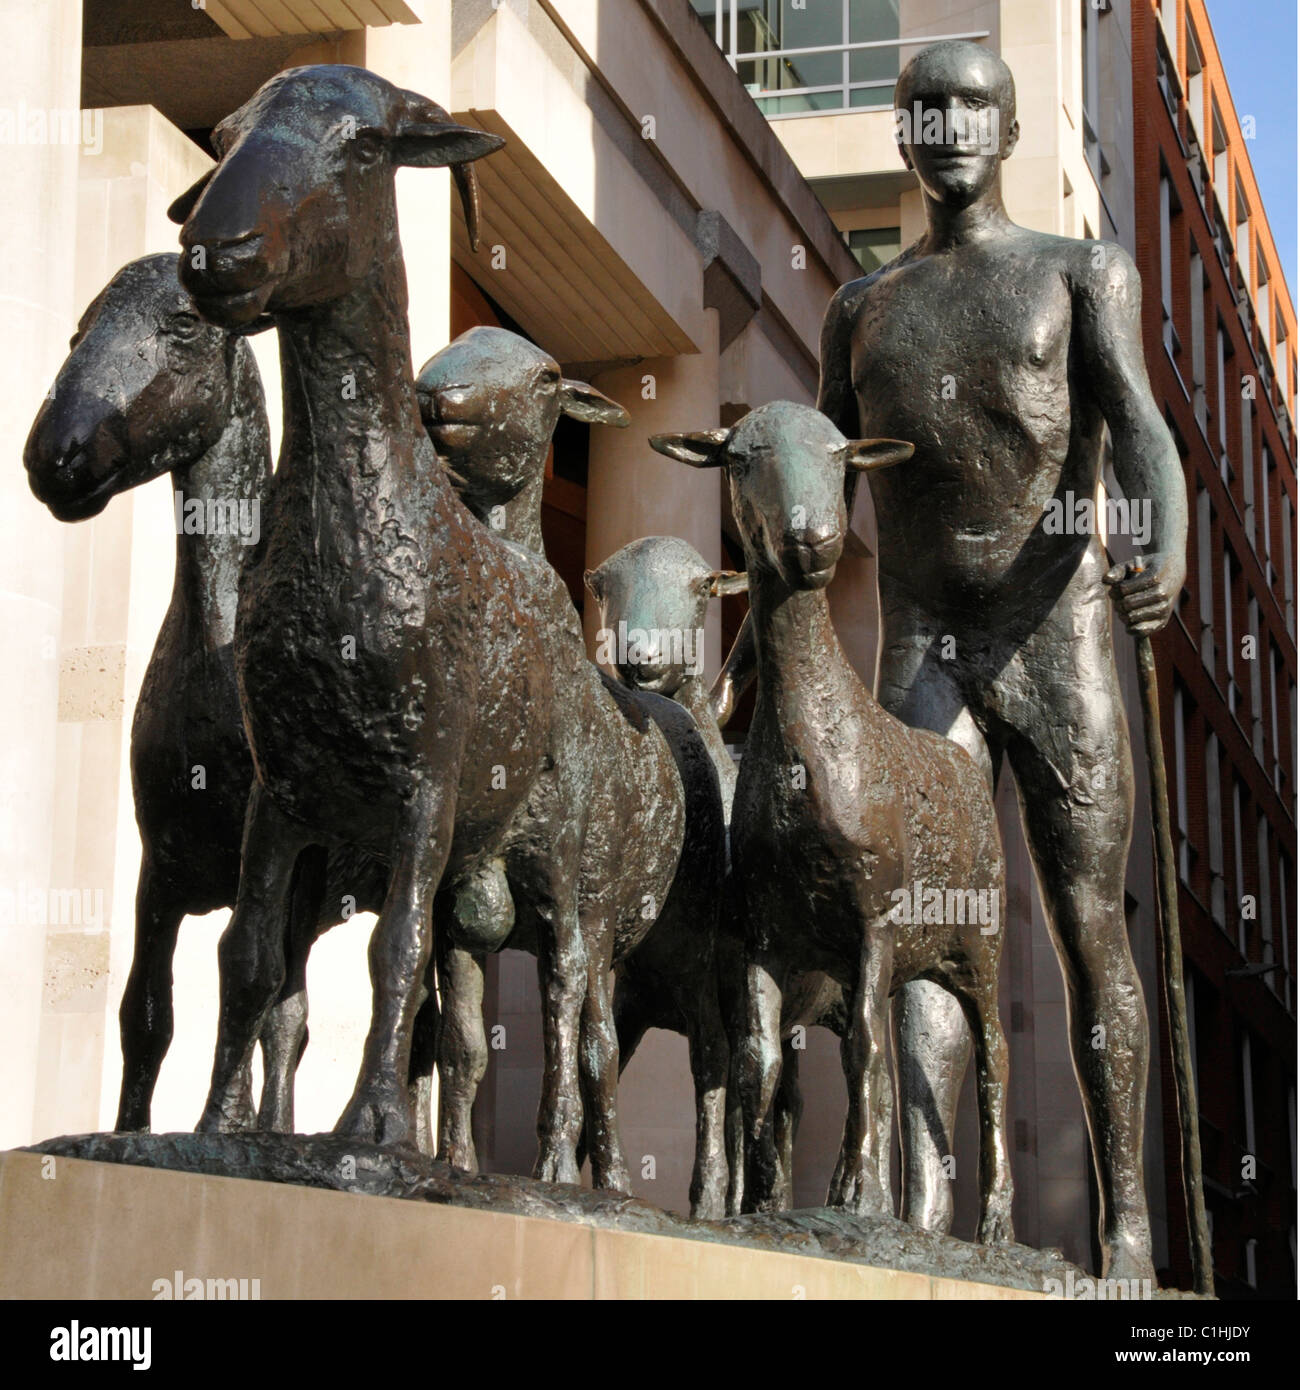 Paternoster also known as Shepherd and Sheep or Shepherd with his Flock bronze sculpture by Dame Elisabeth Frink Paternoster Square City of London UK Stock Photo